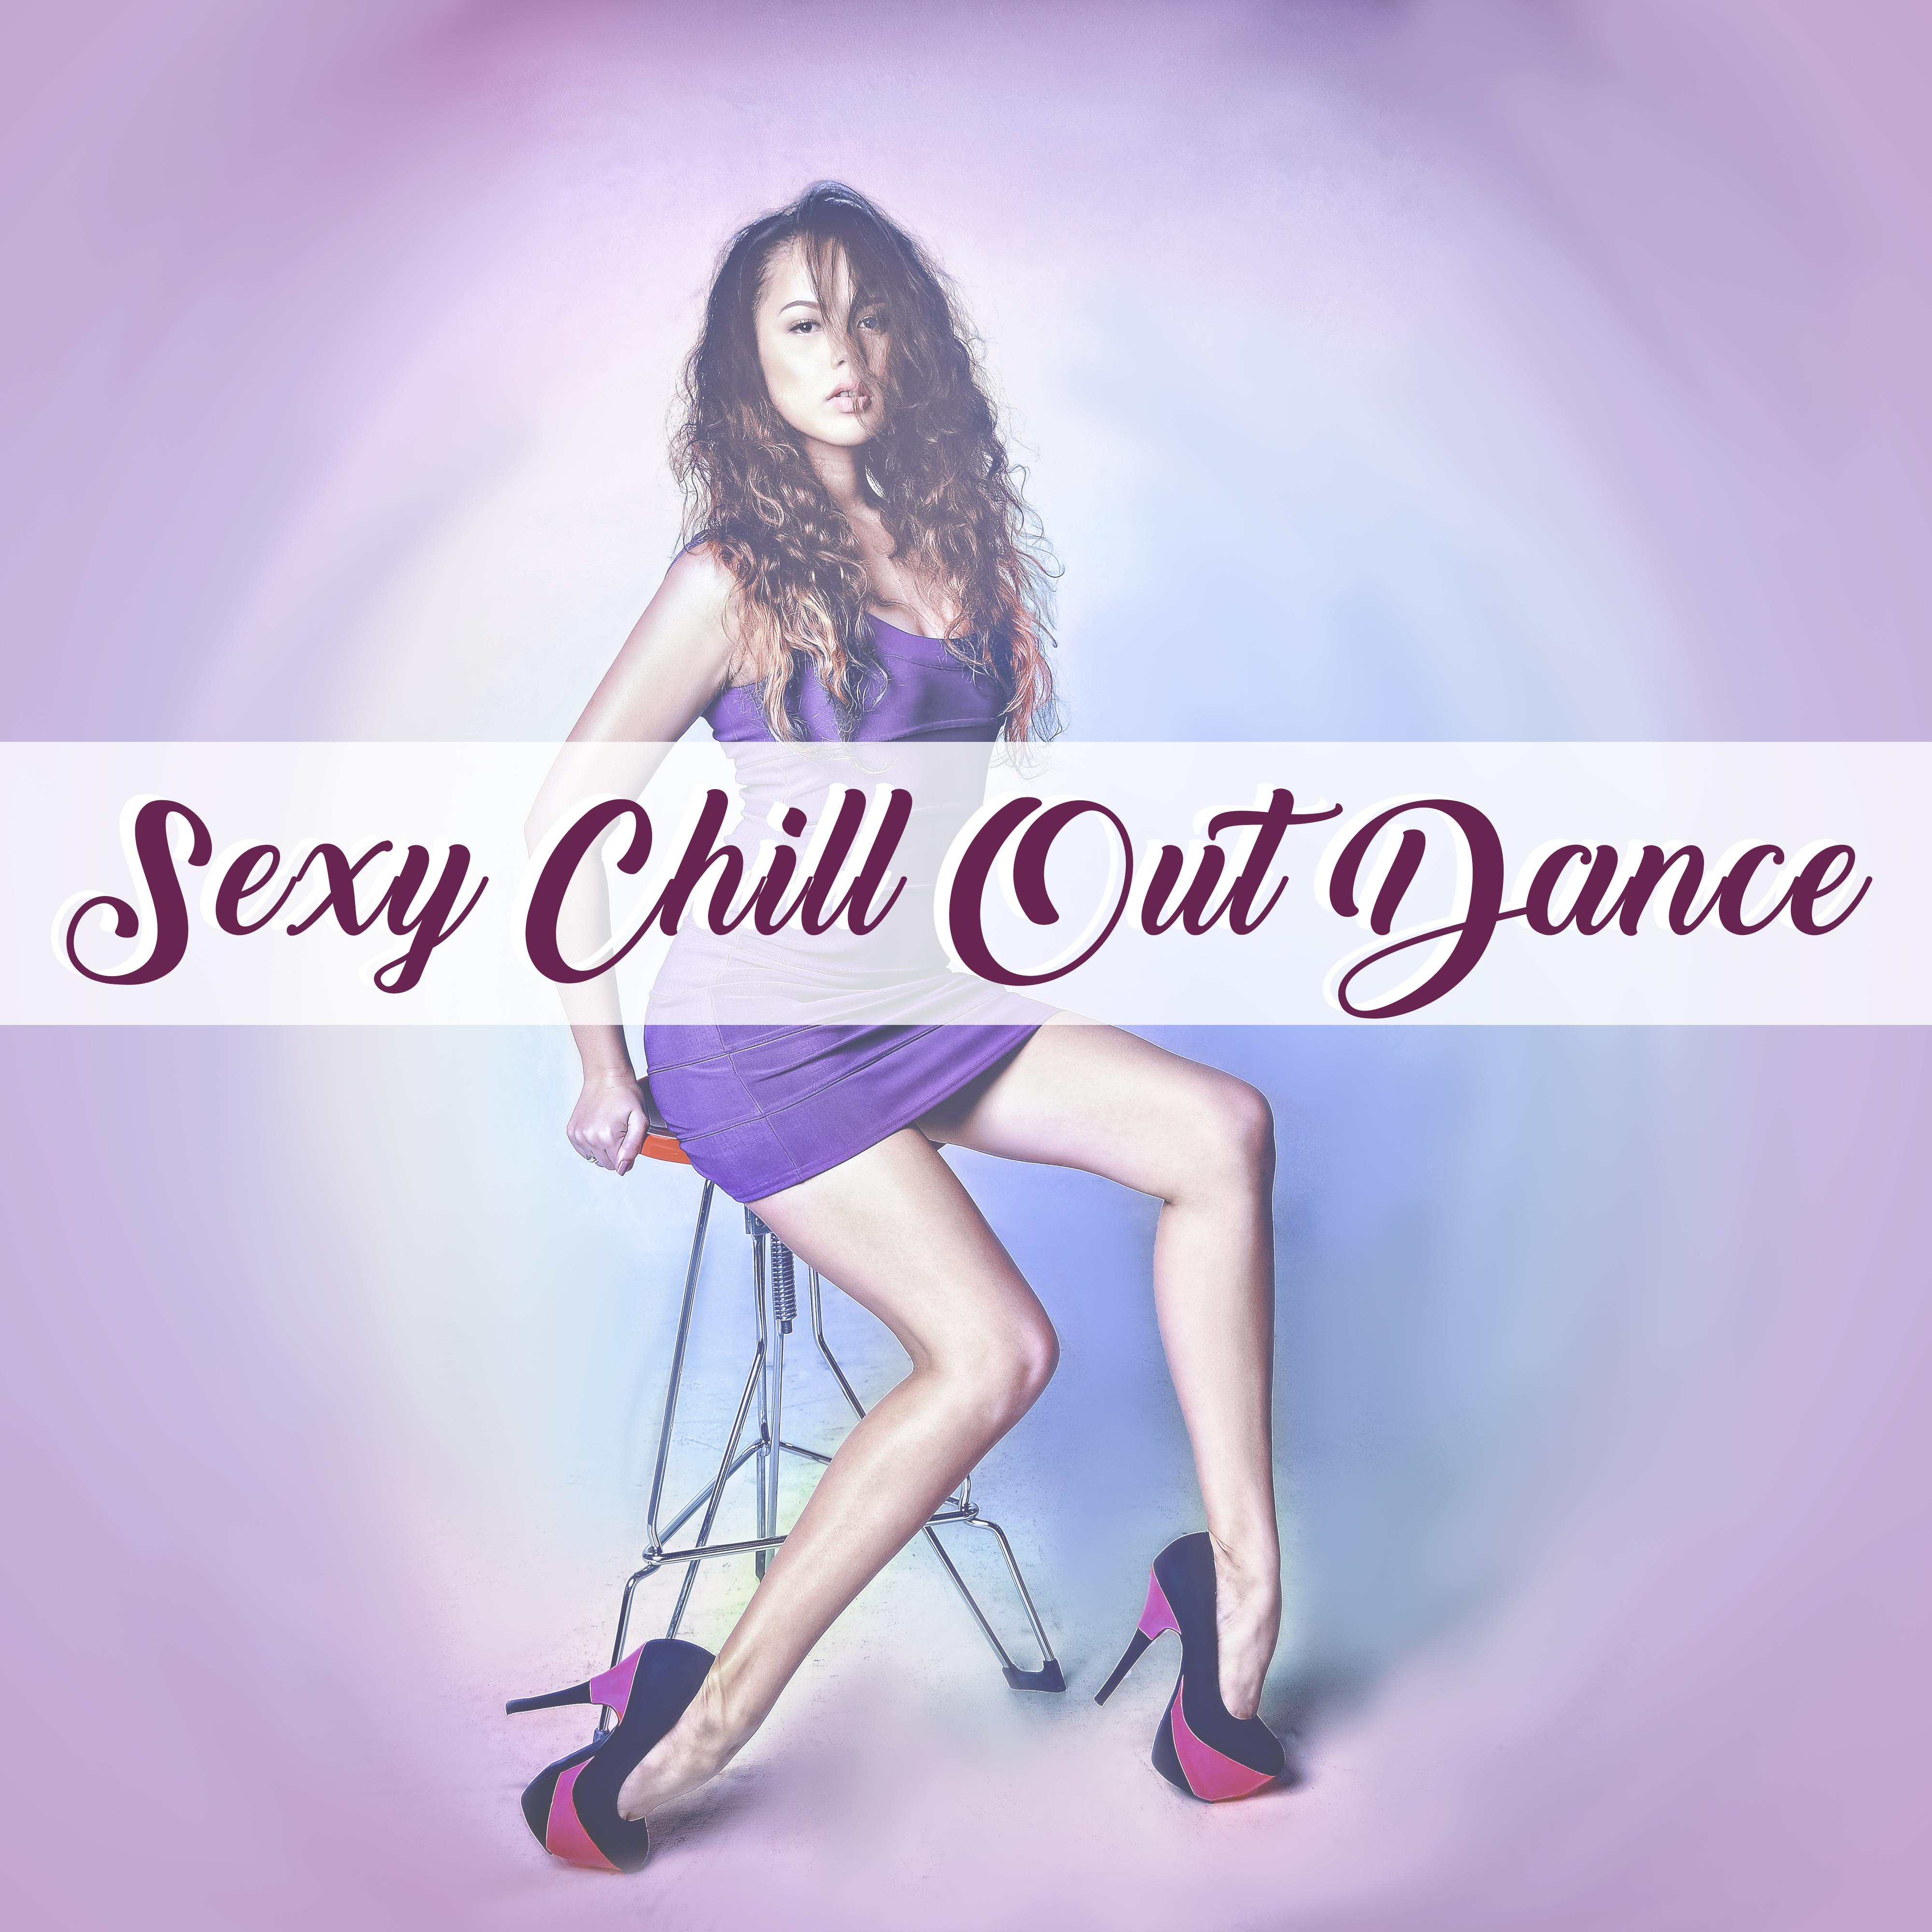 **** Chill Out Dance – Deep  Chill Out  Beats, Beach Music, Erotic Dance, Smooth Chillout Vibrations